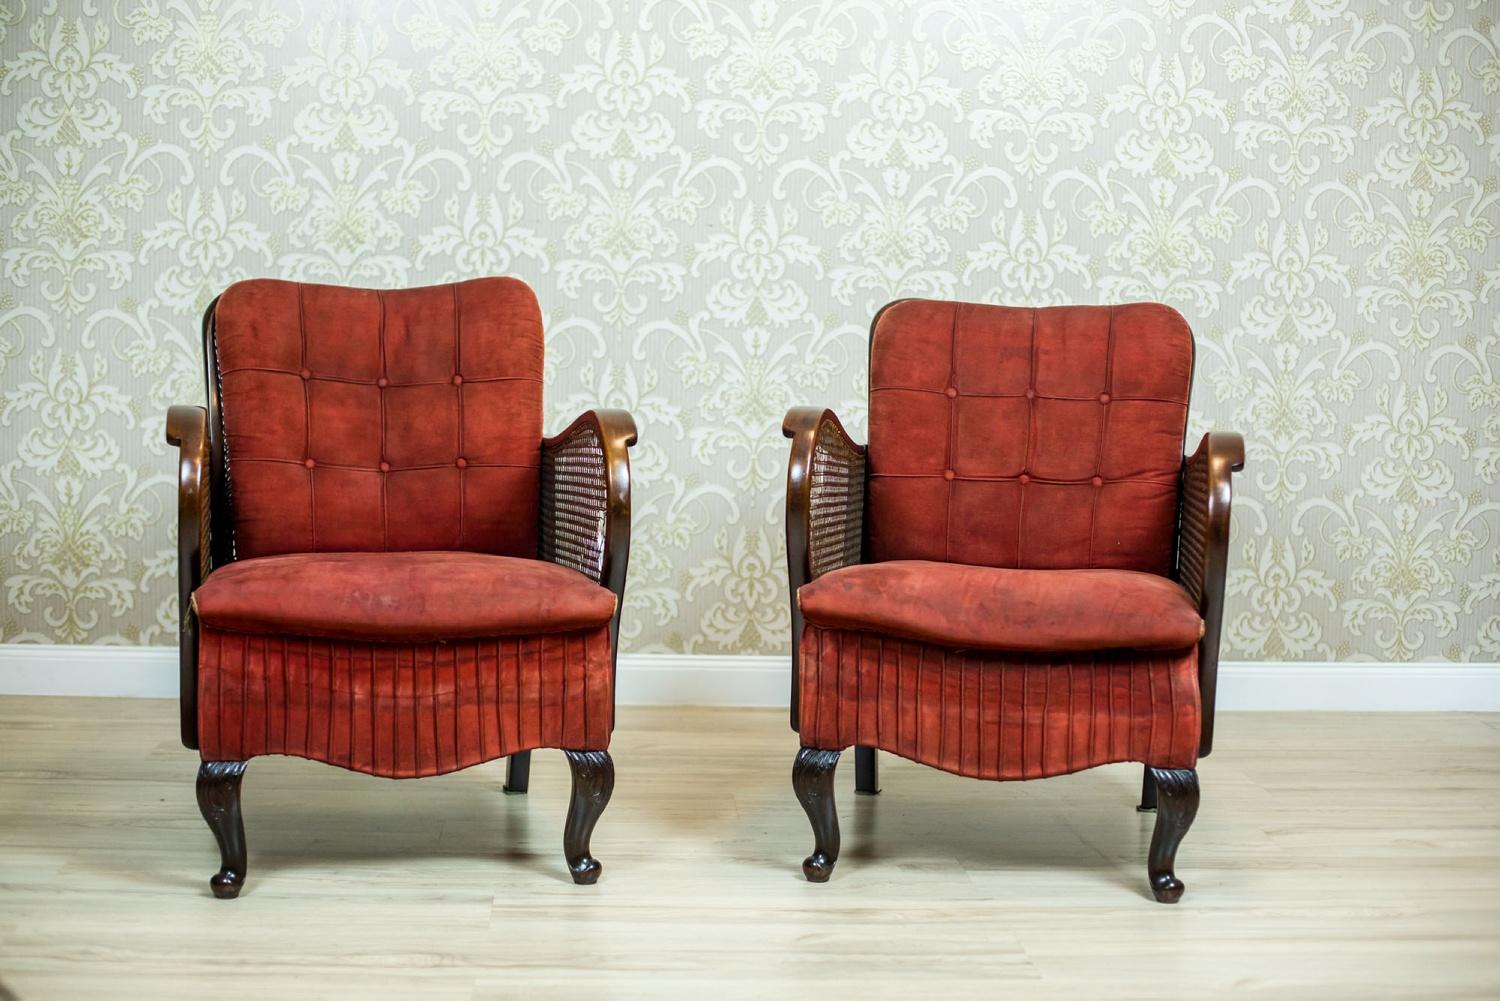 We present you two armchairs from the 1920s with a signature of the Thonet manufactory.
This furniture is made of beech. Furthermore, the seat is spring and upholstered softly.
The cushion of the backrest is padded and removable.
Both armchairs